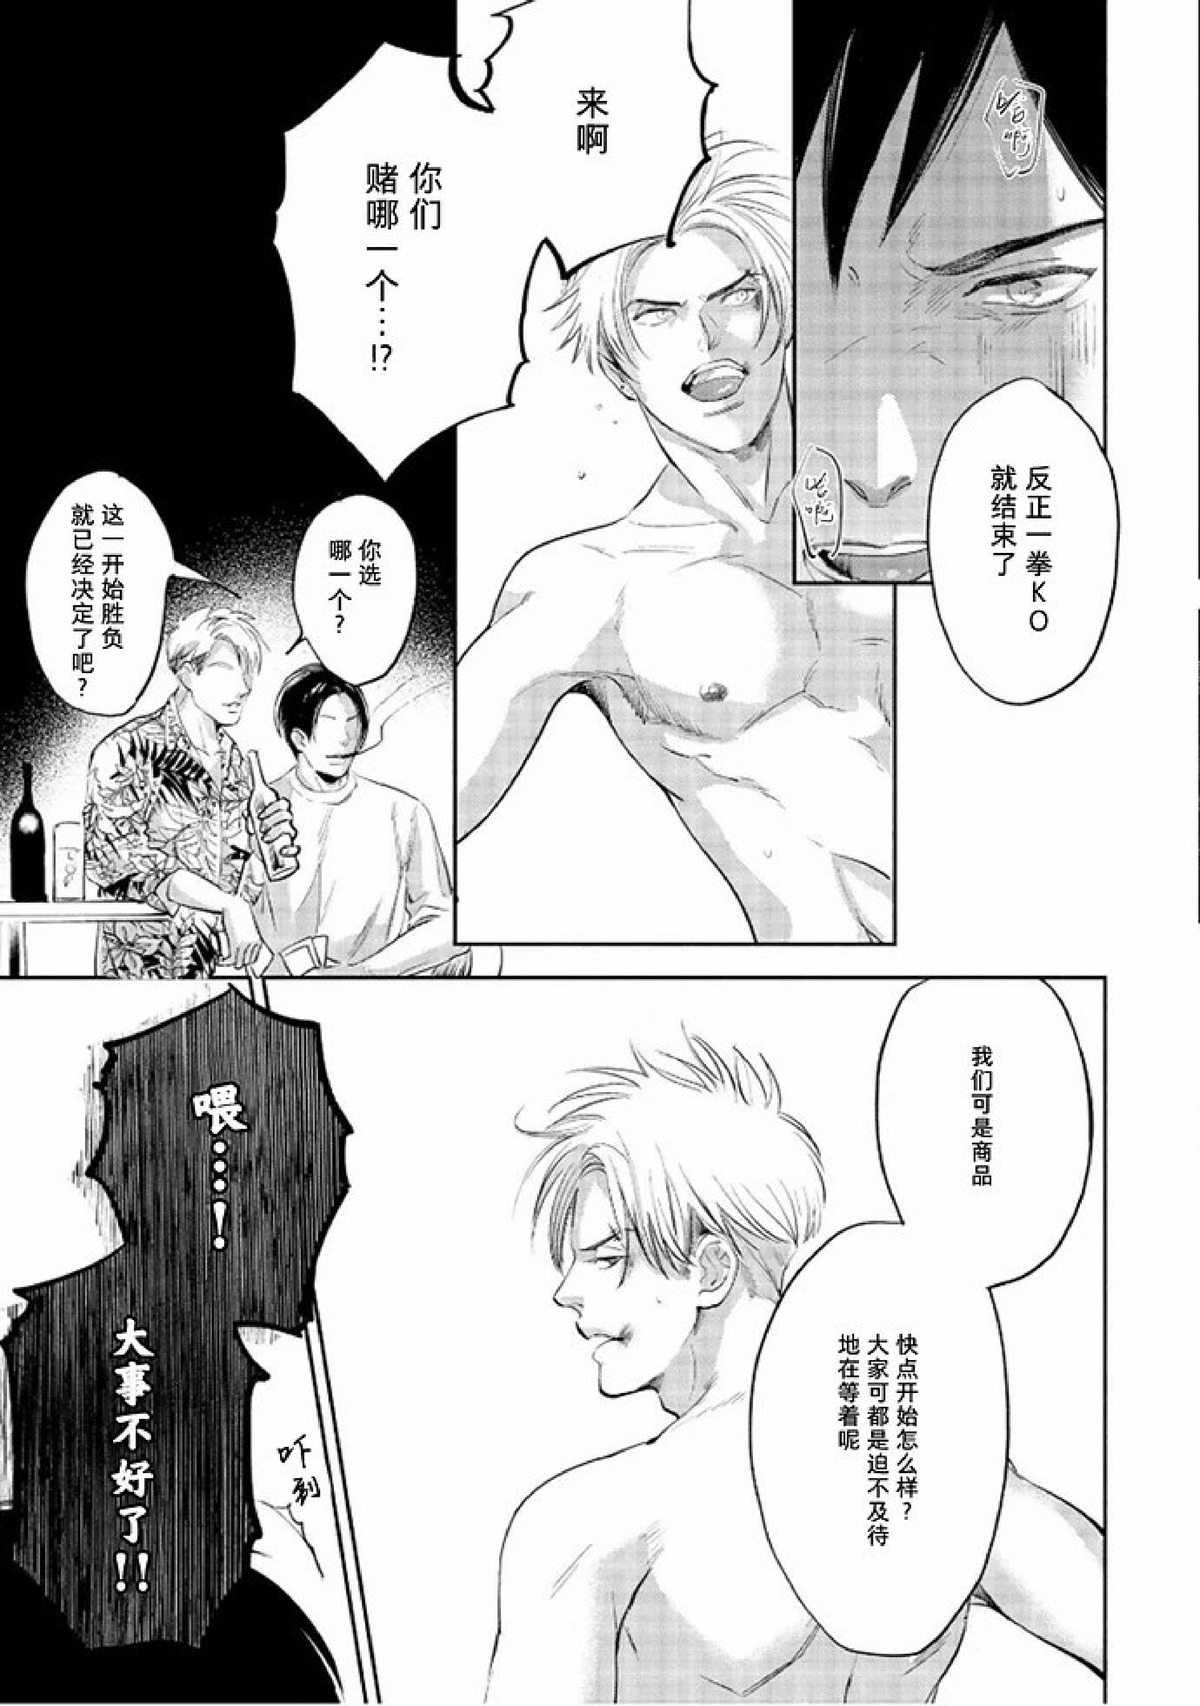 【Two sides of the same coin[腐漫]】漫画-（上卷01-02）章节漫画下拉式图片-65.jpg